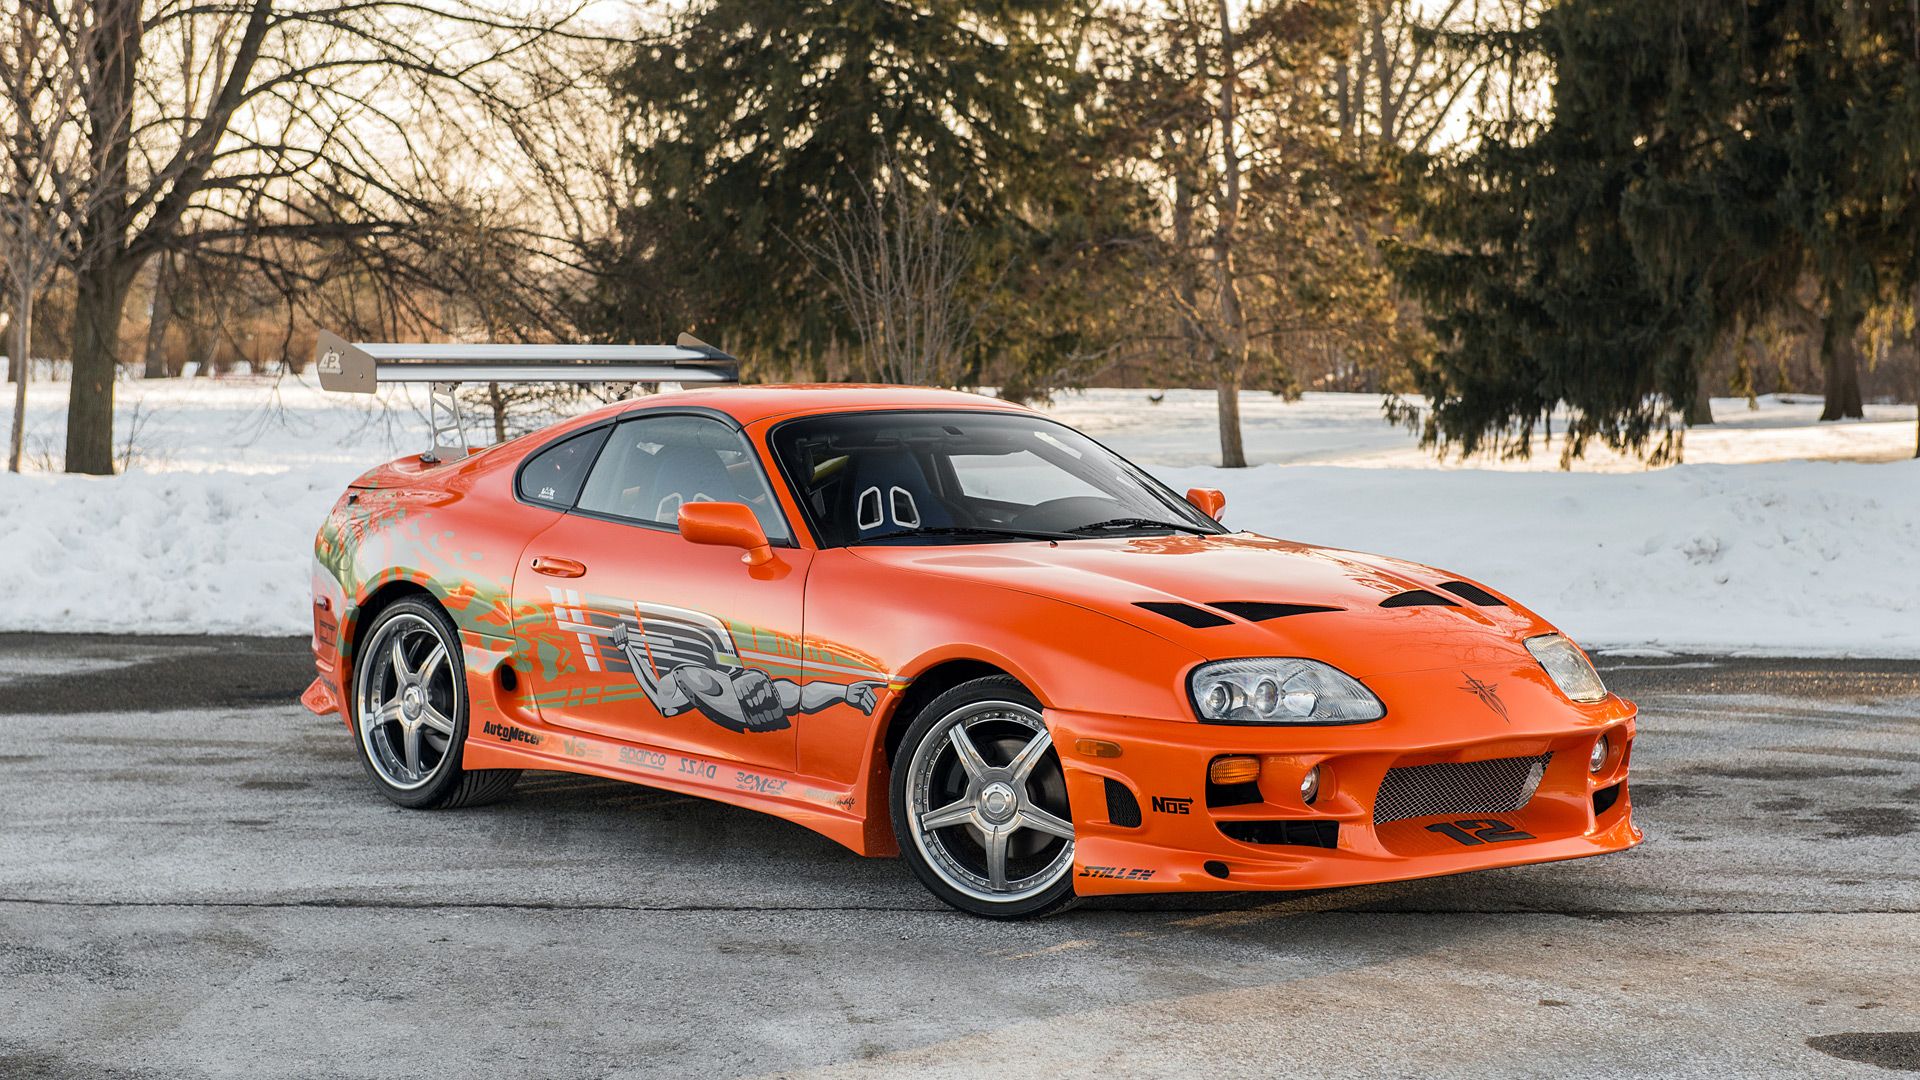 Toyota Supra 'The Fast and the Furious' Wallpaper, Specs & Videos